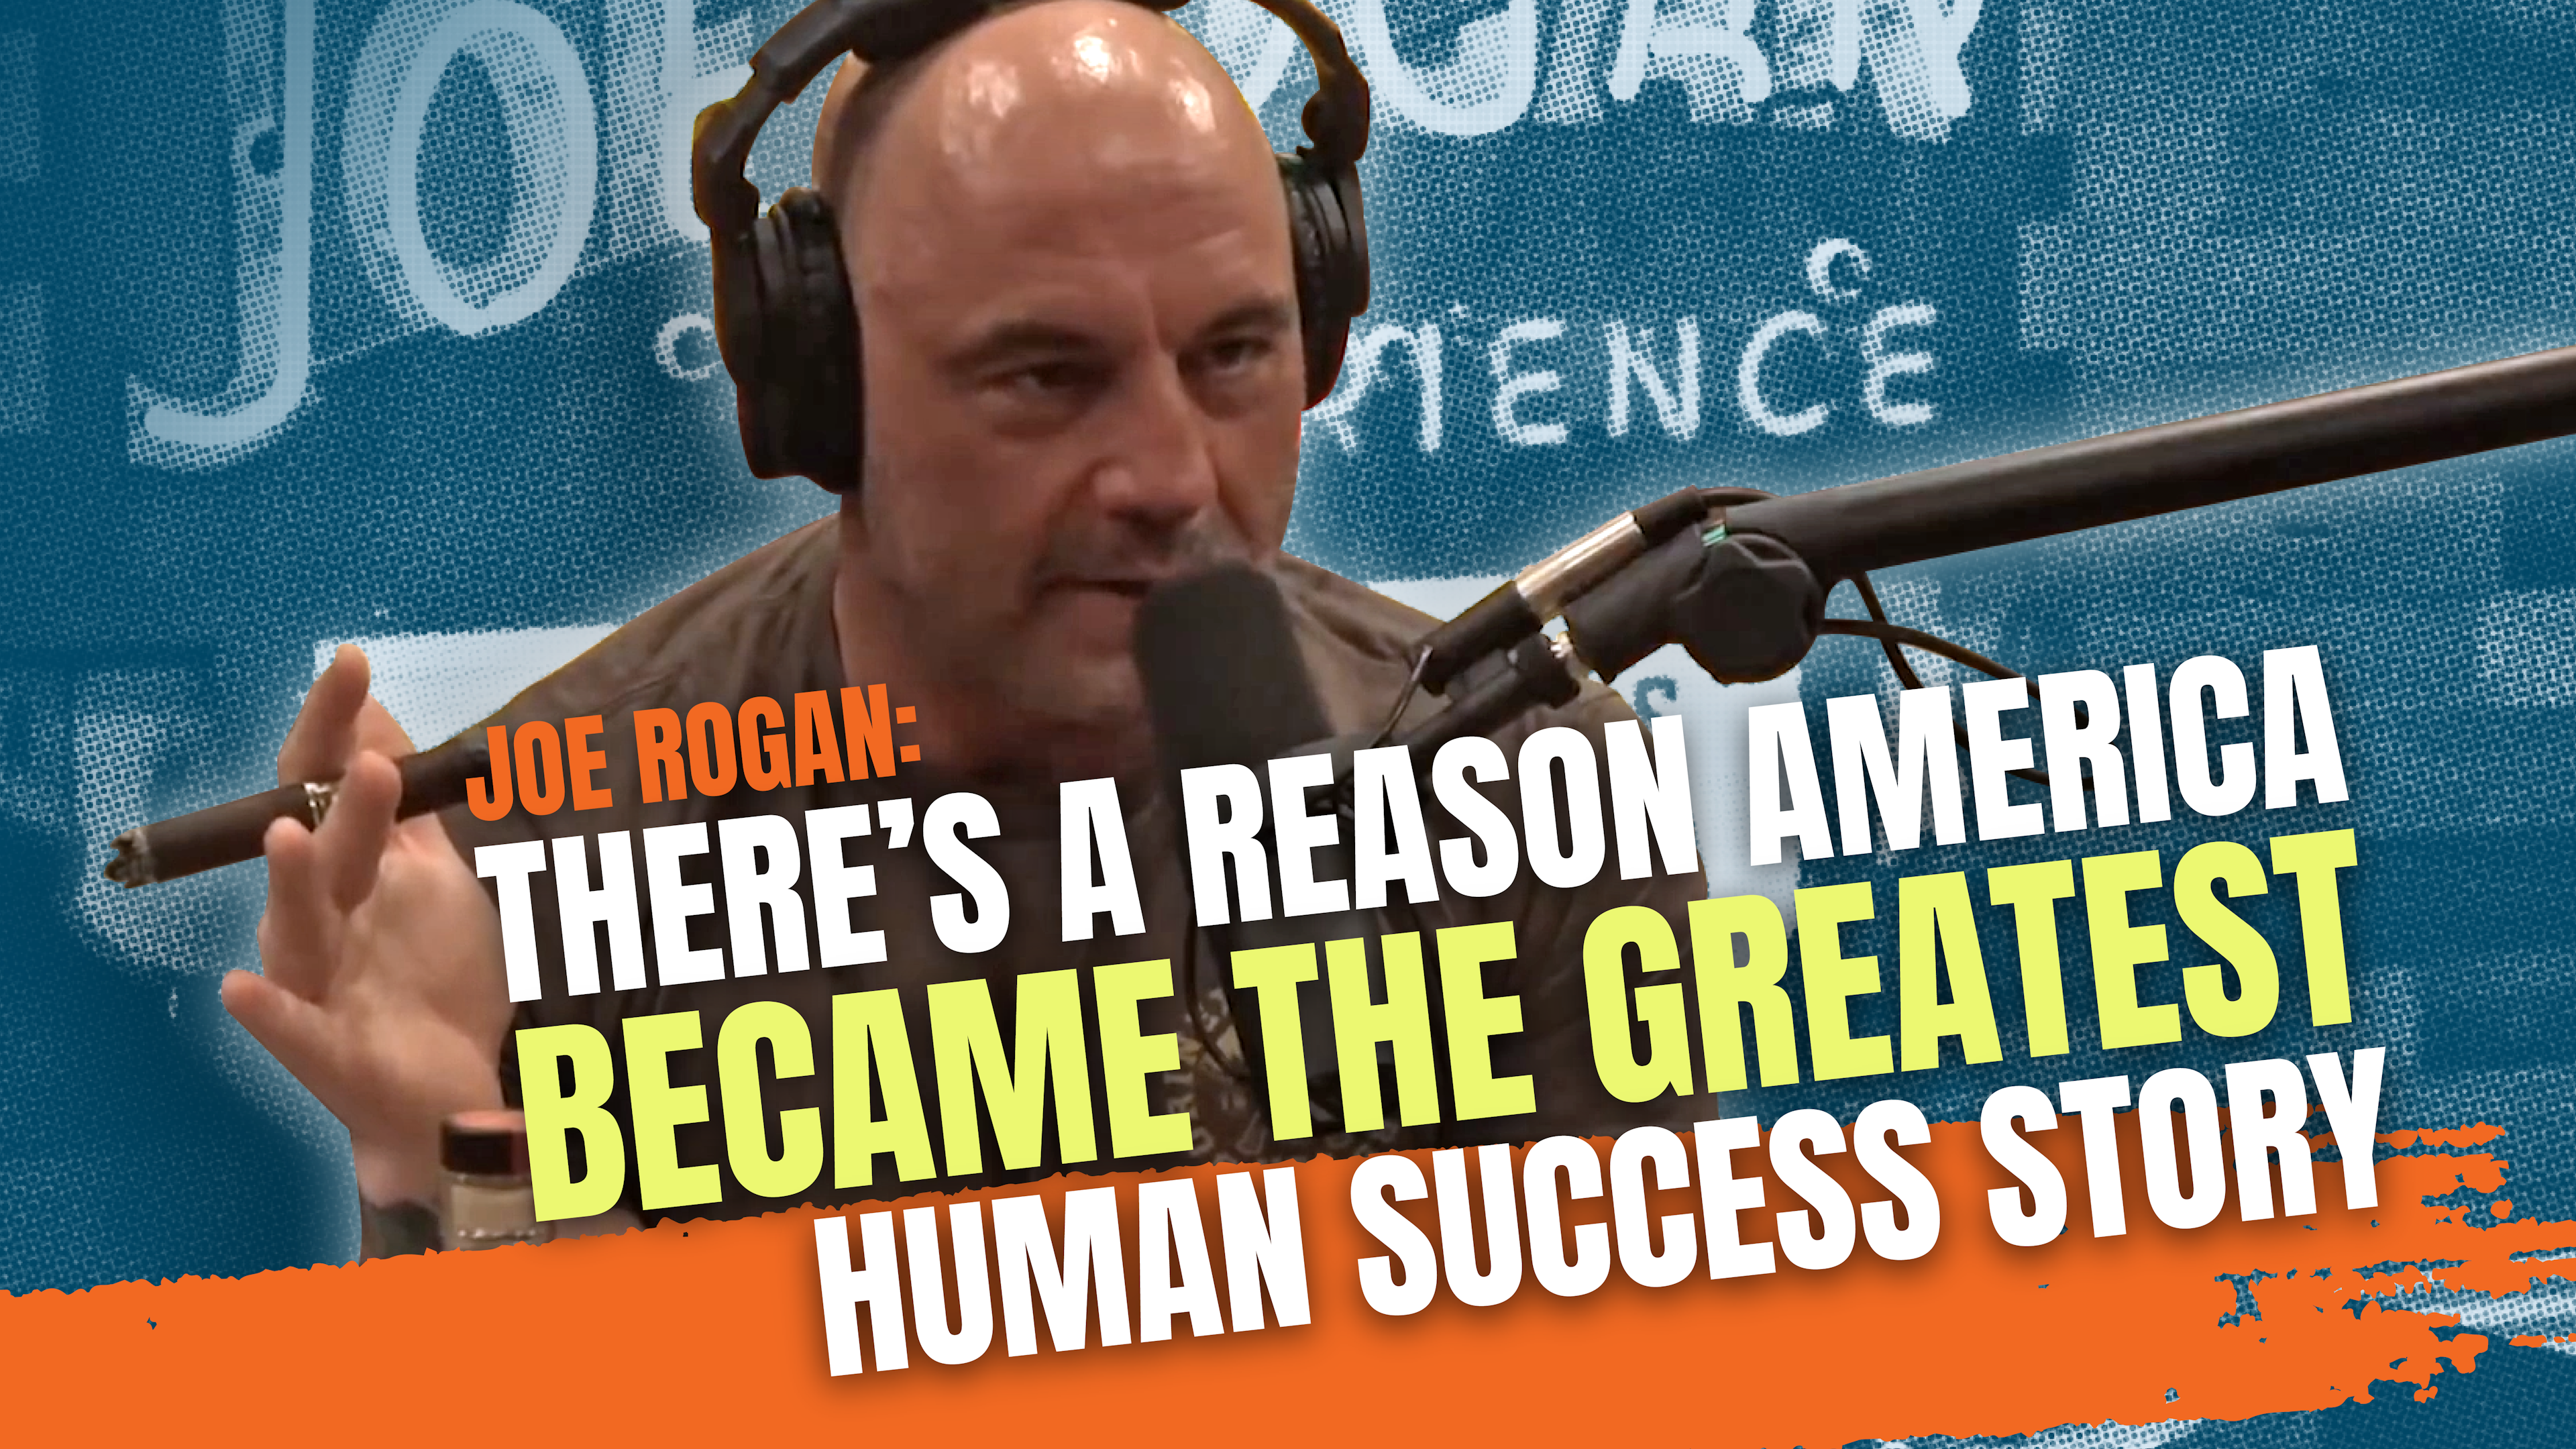 Joe Rogan: There's a Reason America Became the Greatest Human Success Story